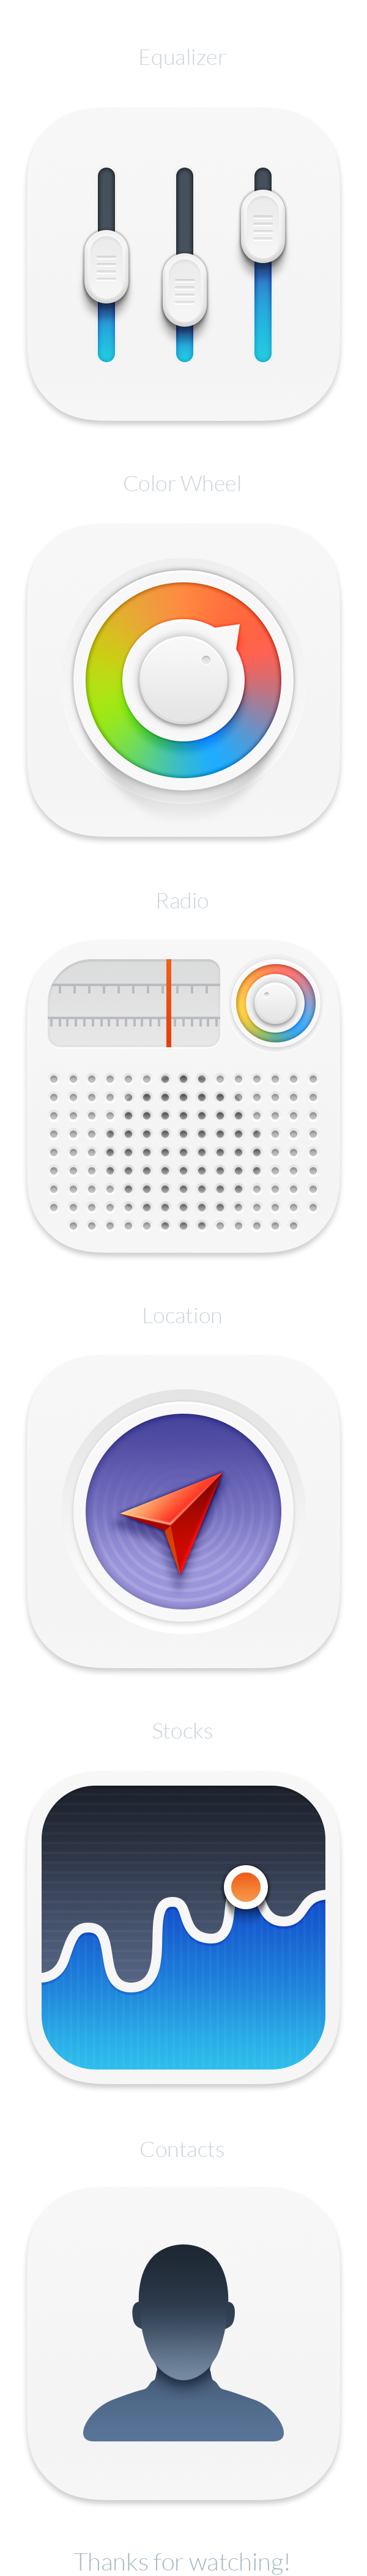 minimanimal Icon simple clean ios7 replacement apple design Os Icondesign graphic clear equalizer